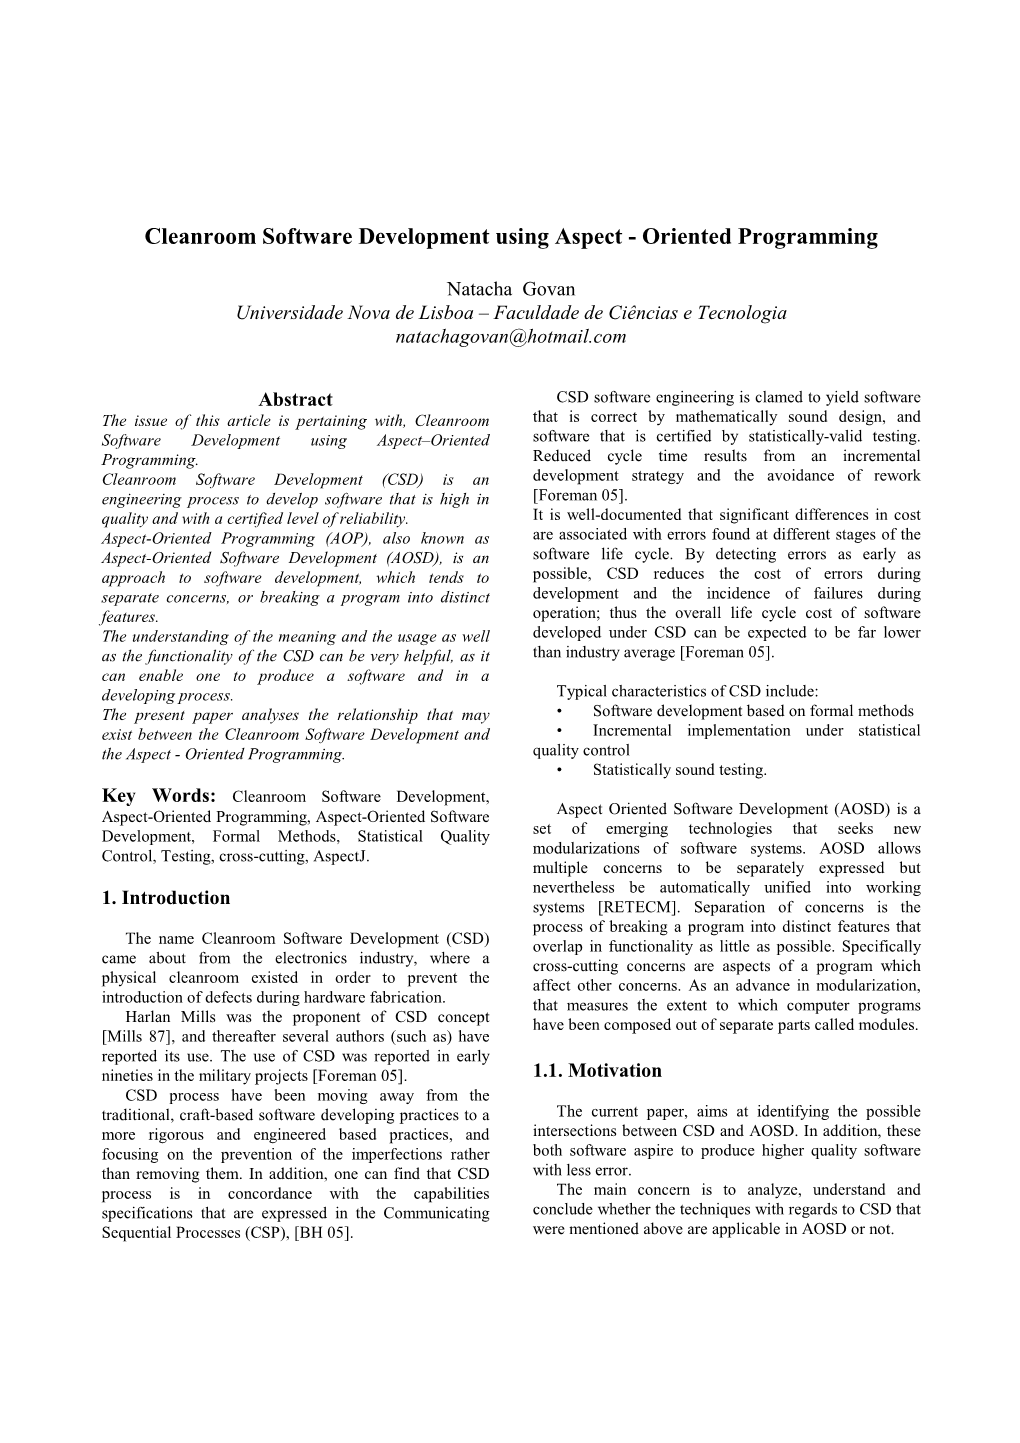 Cleanroom Software Development Using Aspect - Oriented Programming